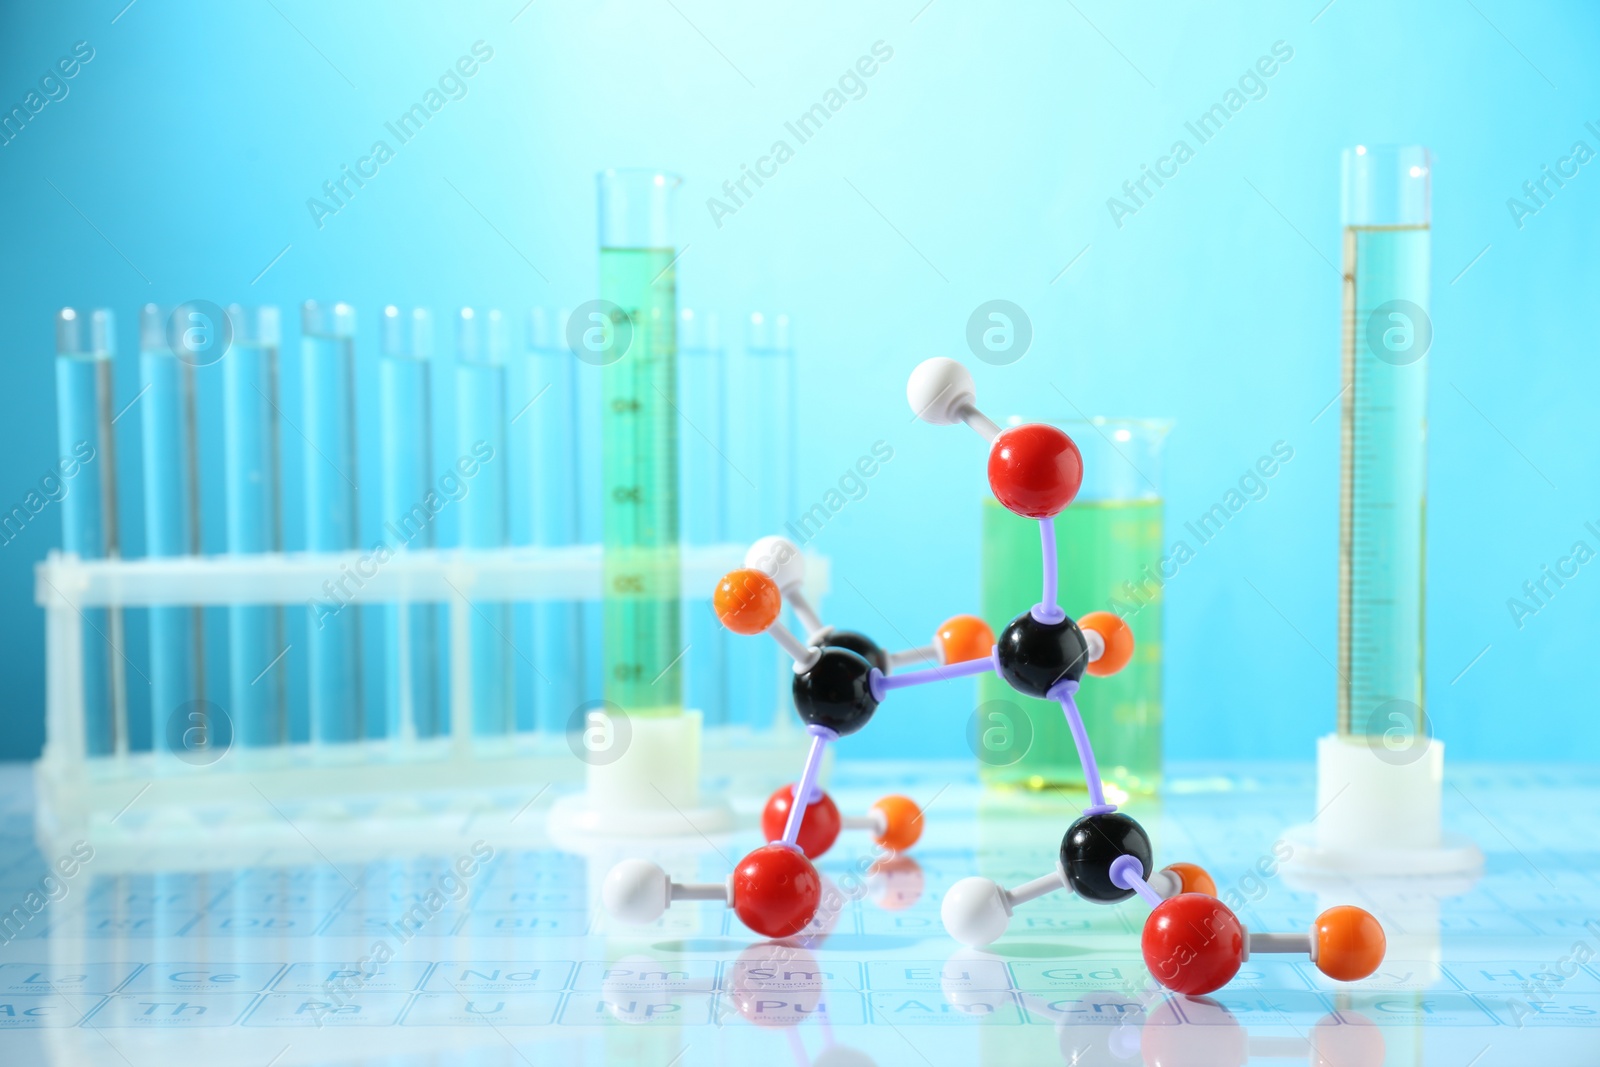 Photo of Molecular model and laboratory glassware on mirror surface against light blue background